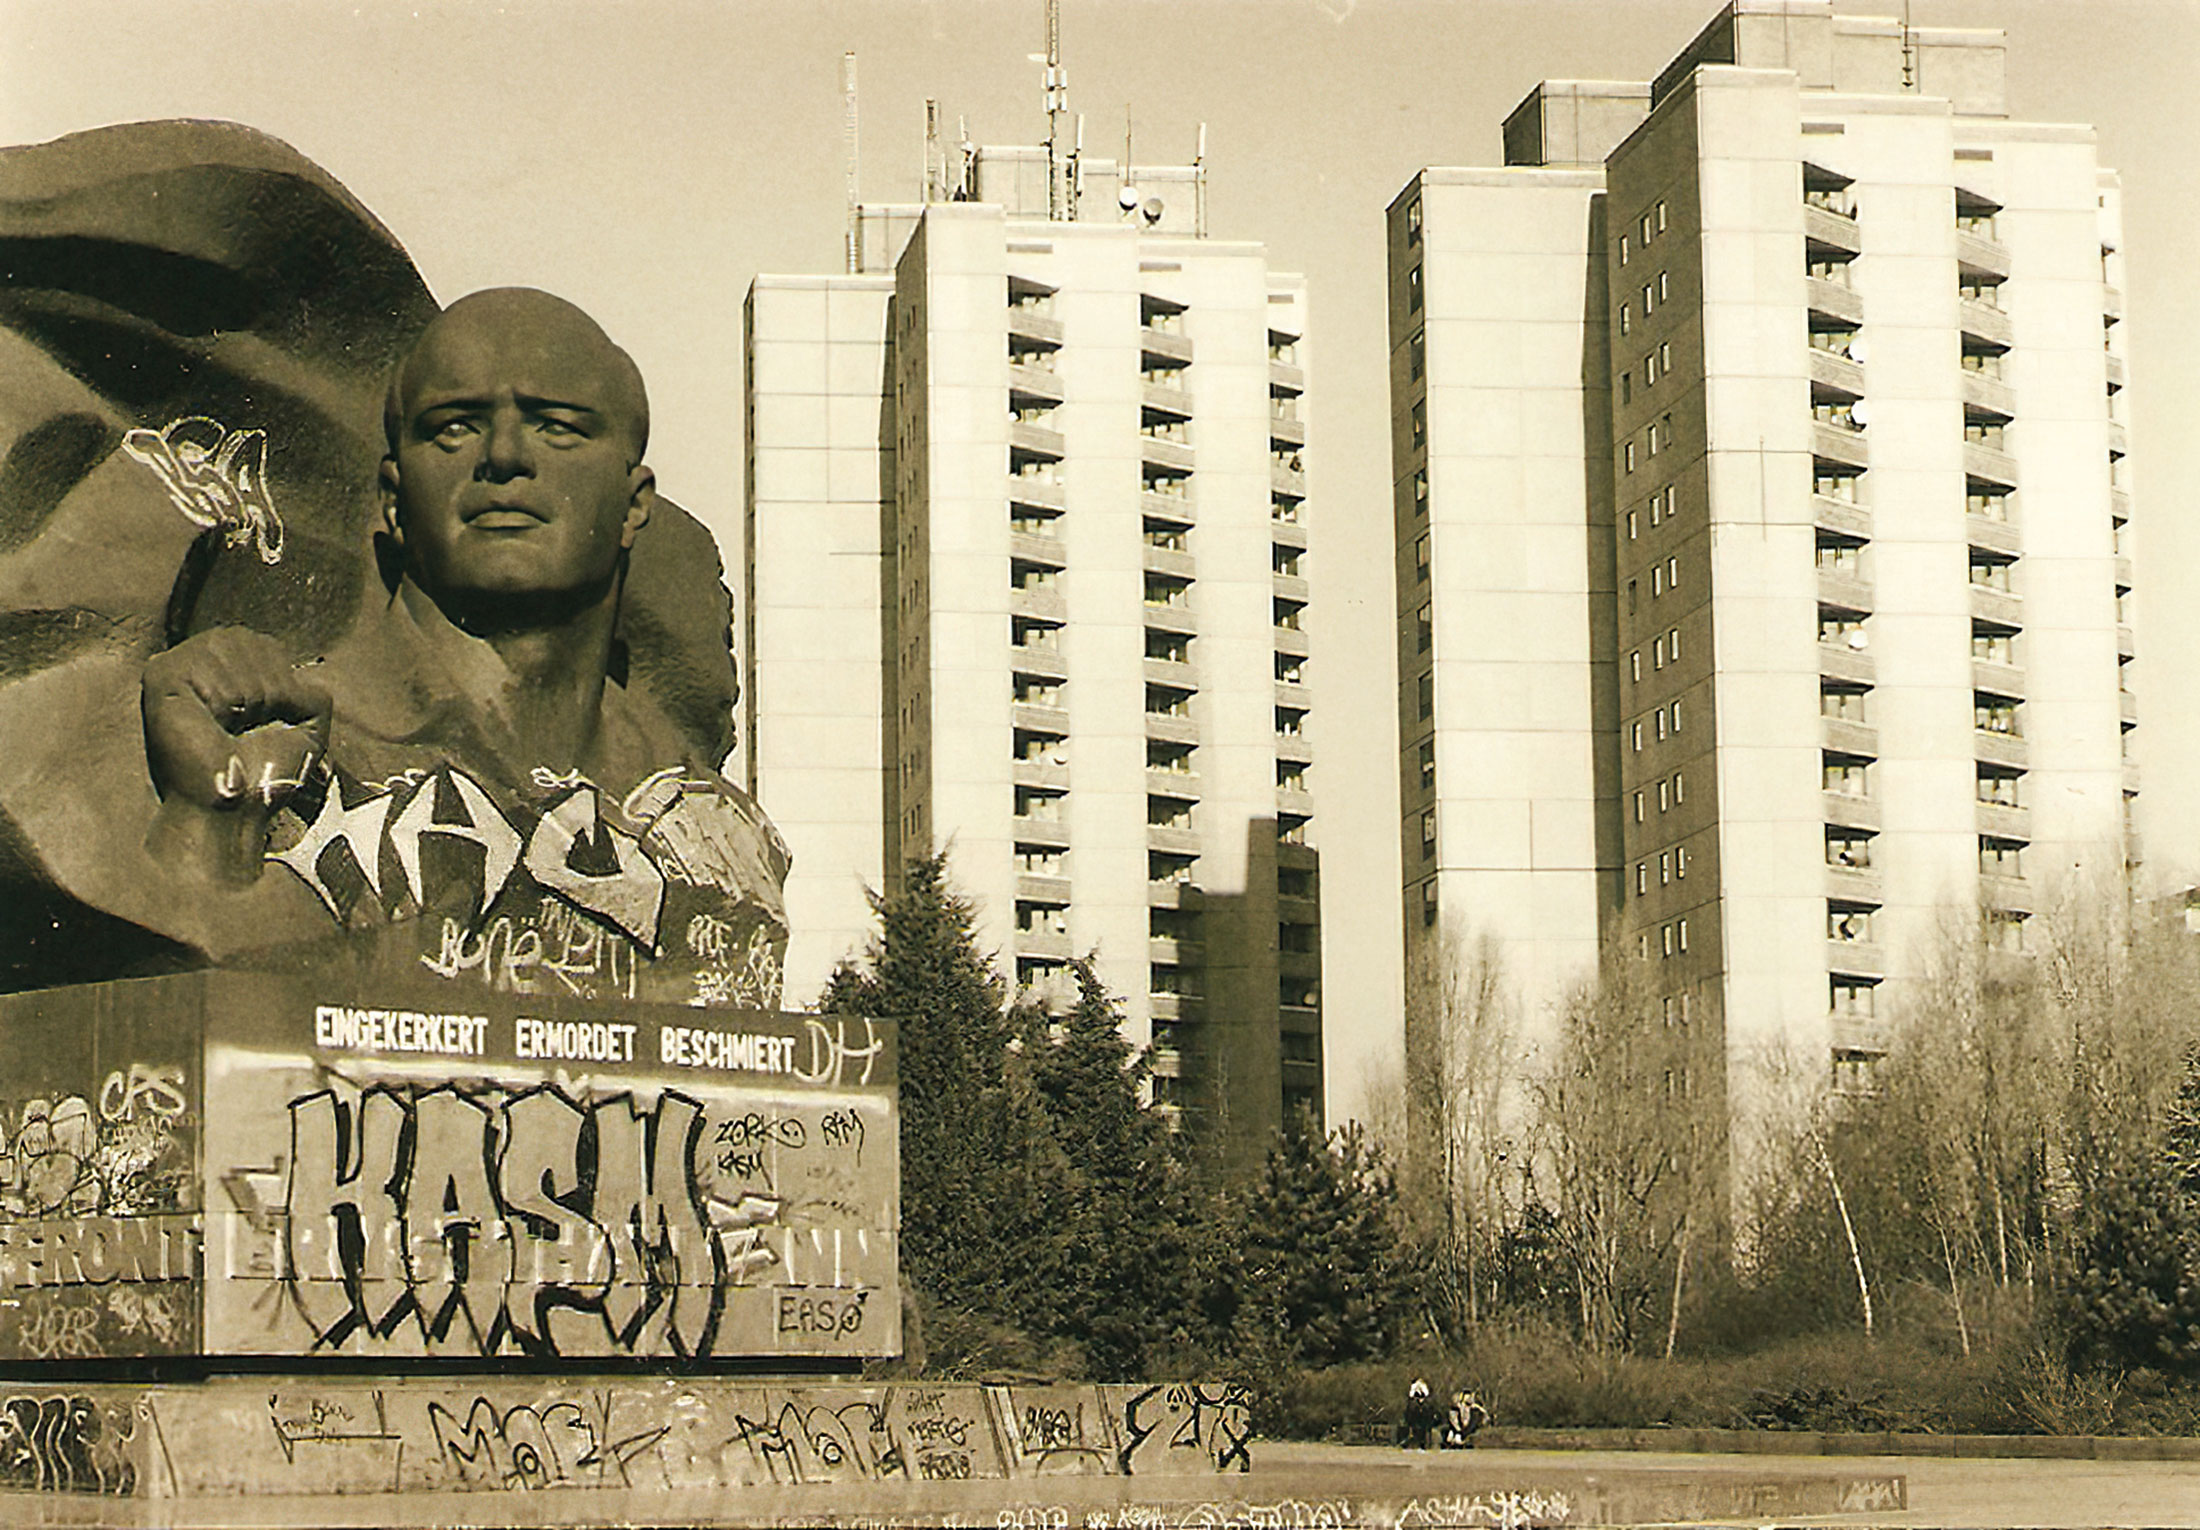 The Thälmann monument has been painted repeatedly with graffiti since the 1990s.